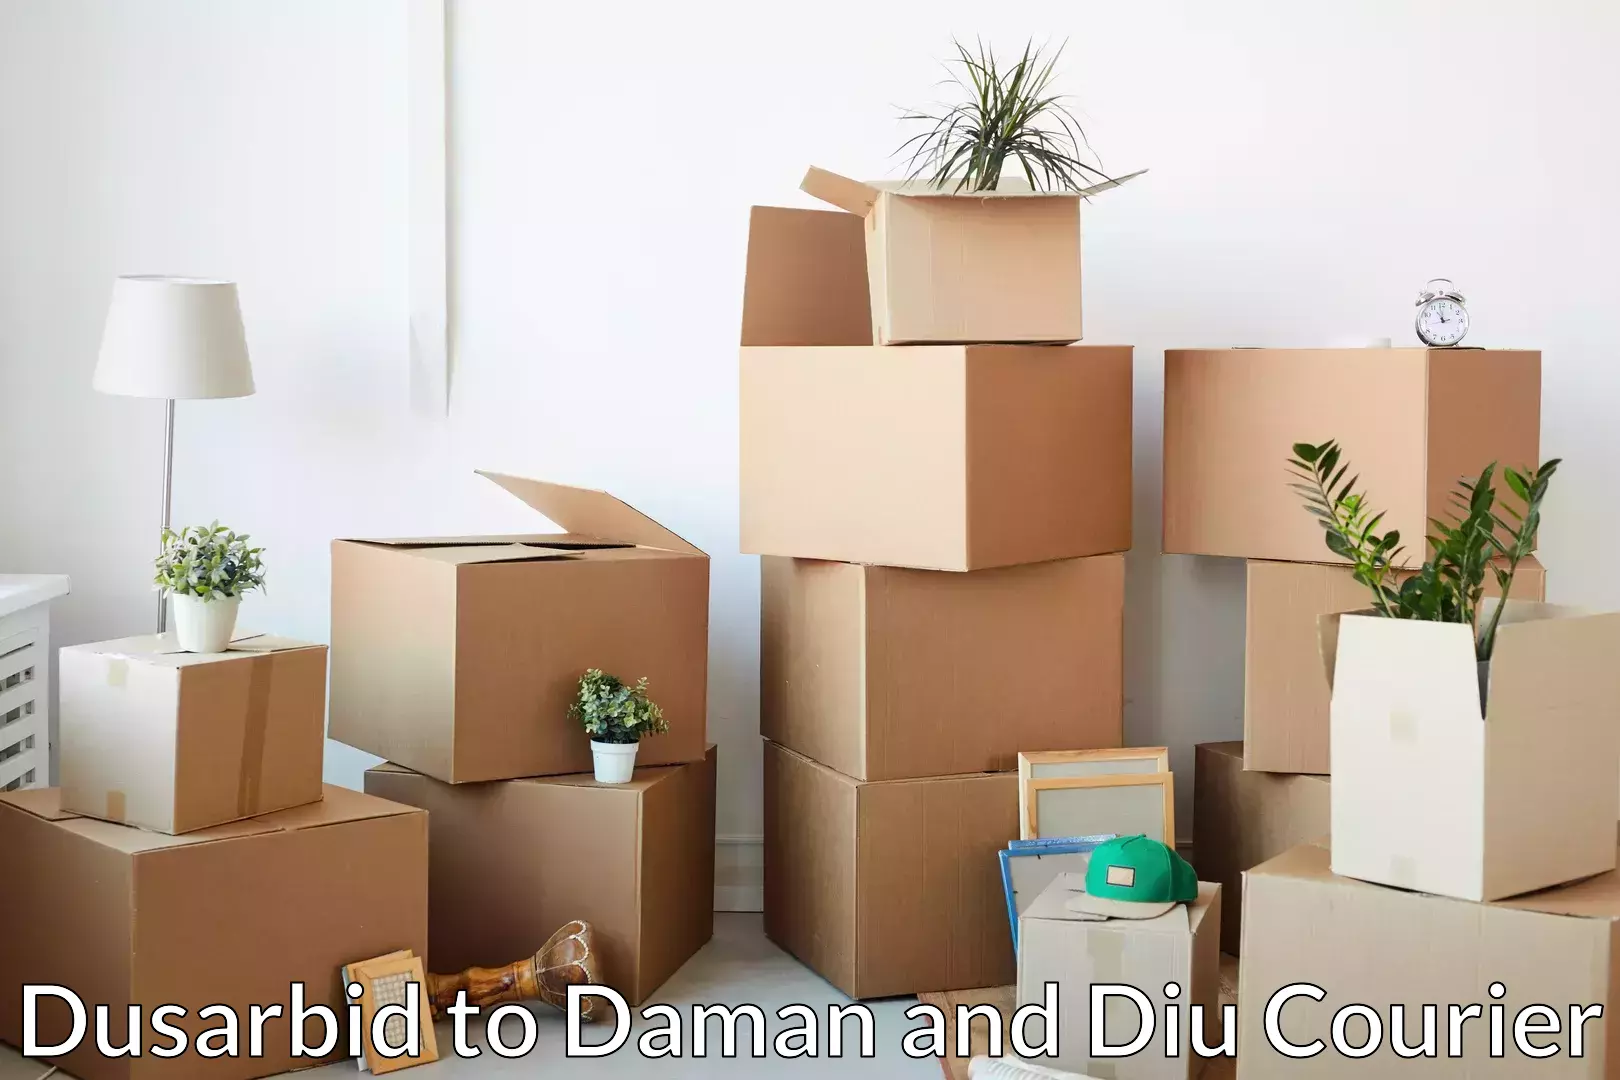 Reliable relocation services Dusarbid to Diu